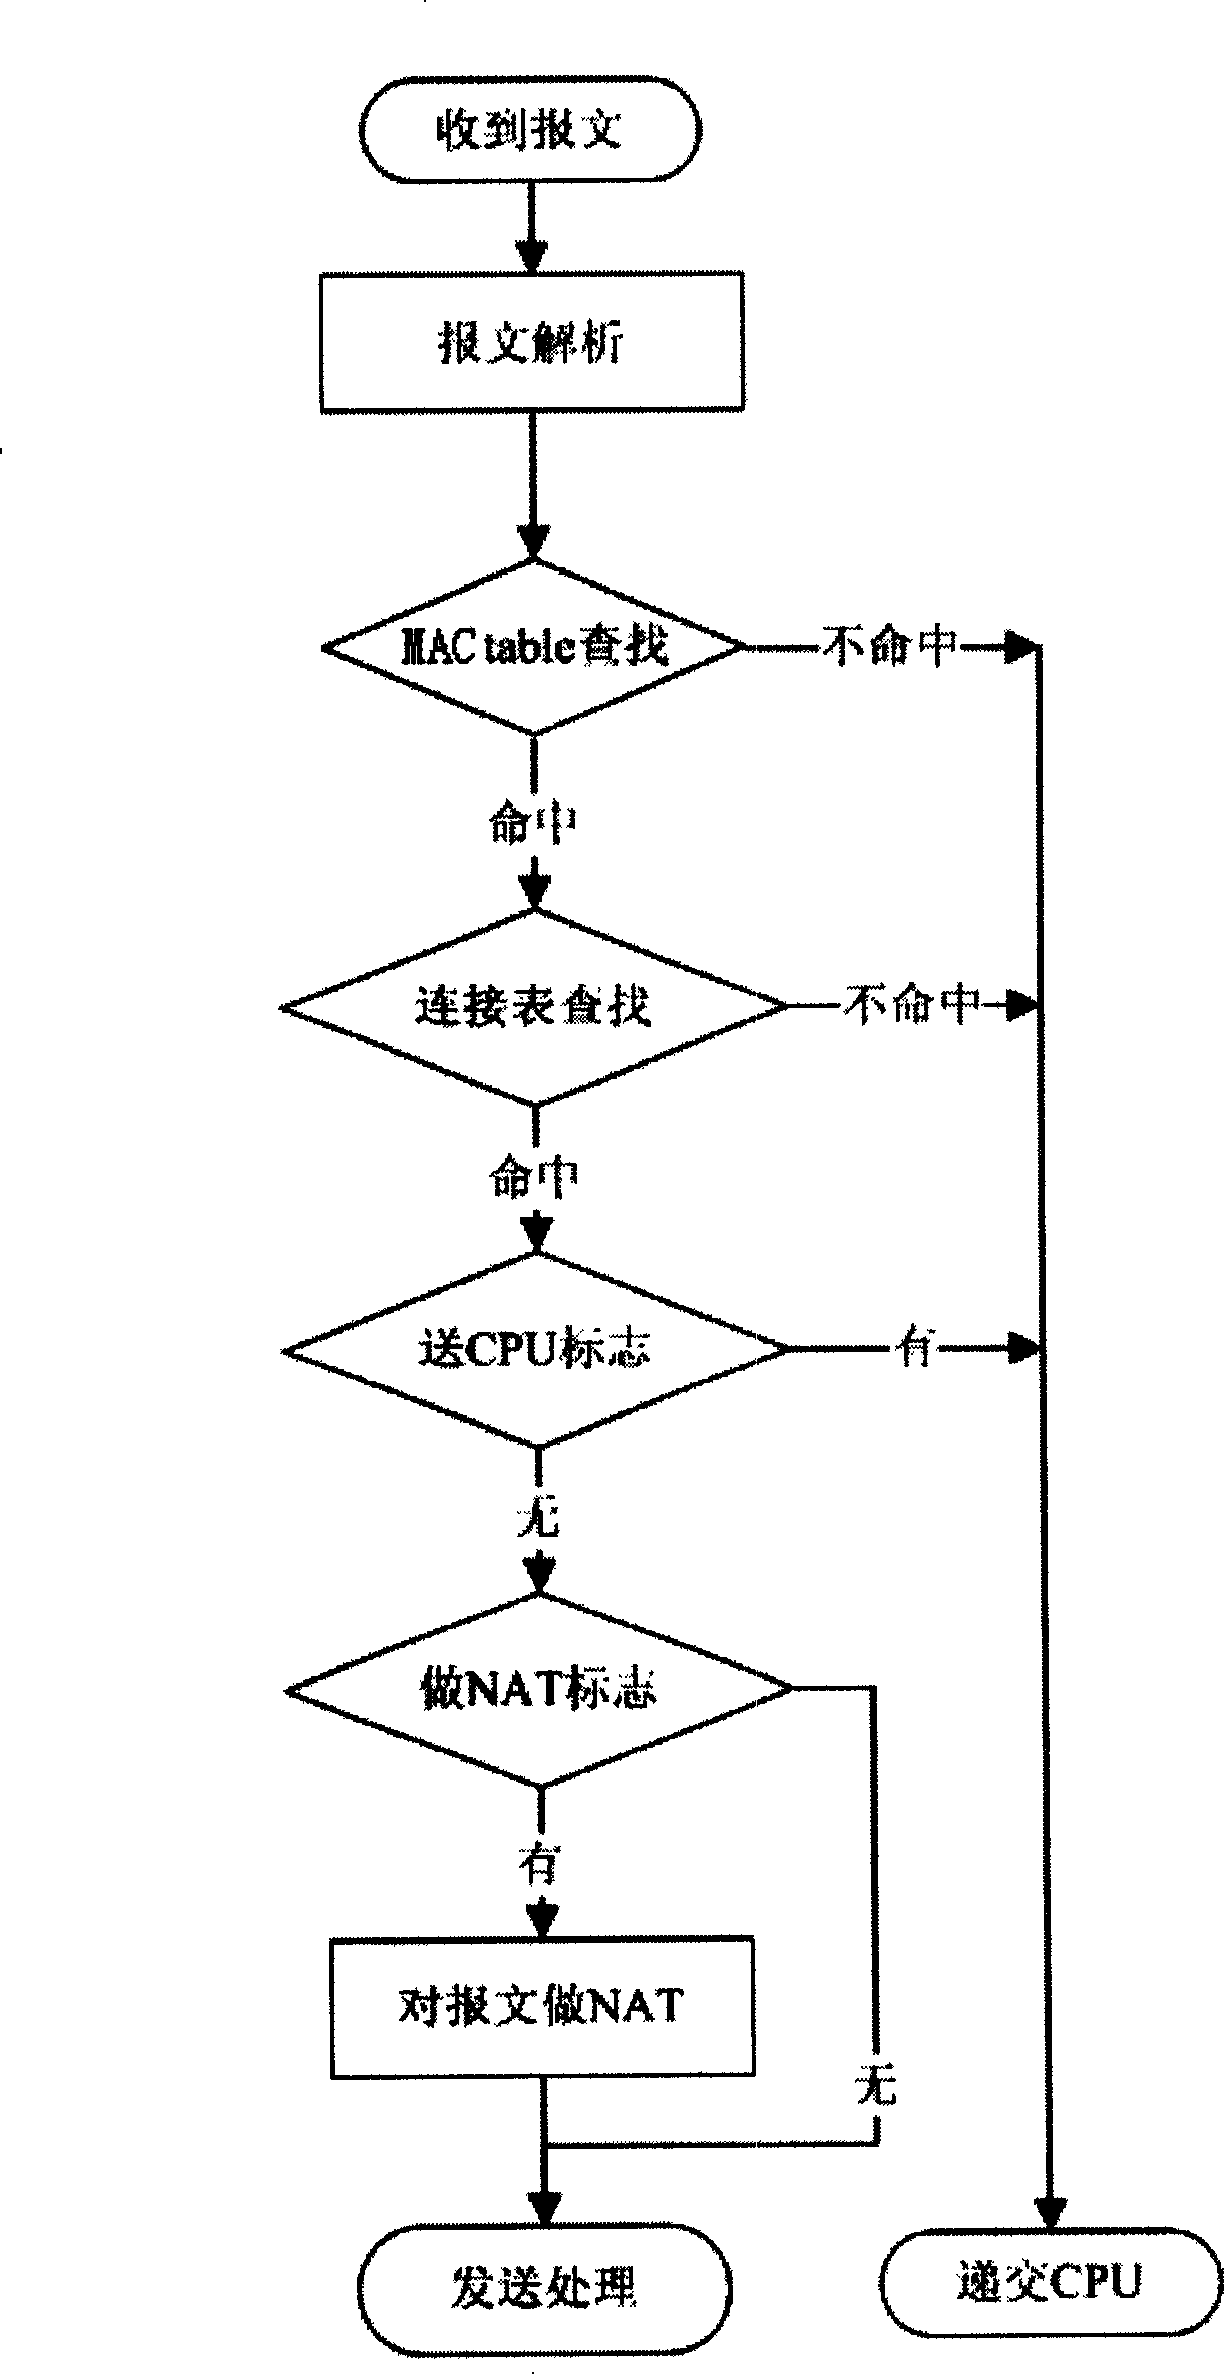 Method for implementing several network security functions with one chip